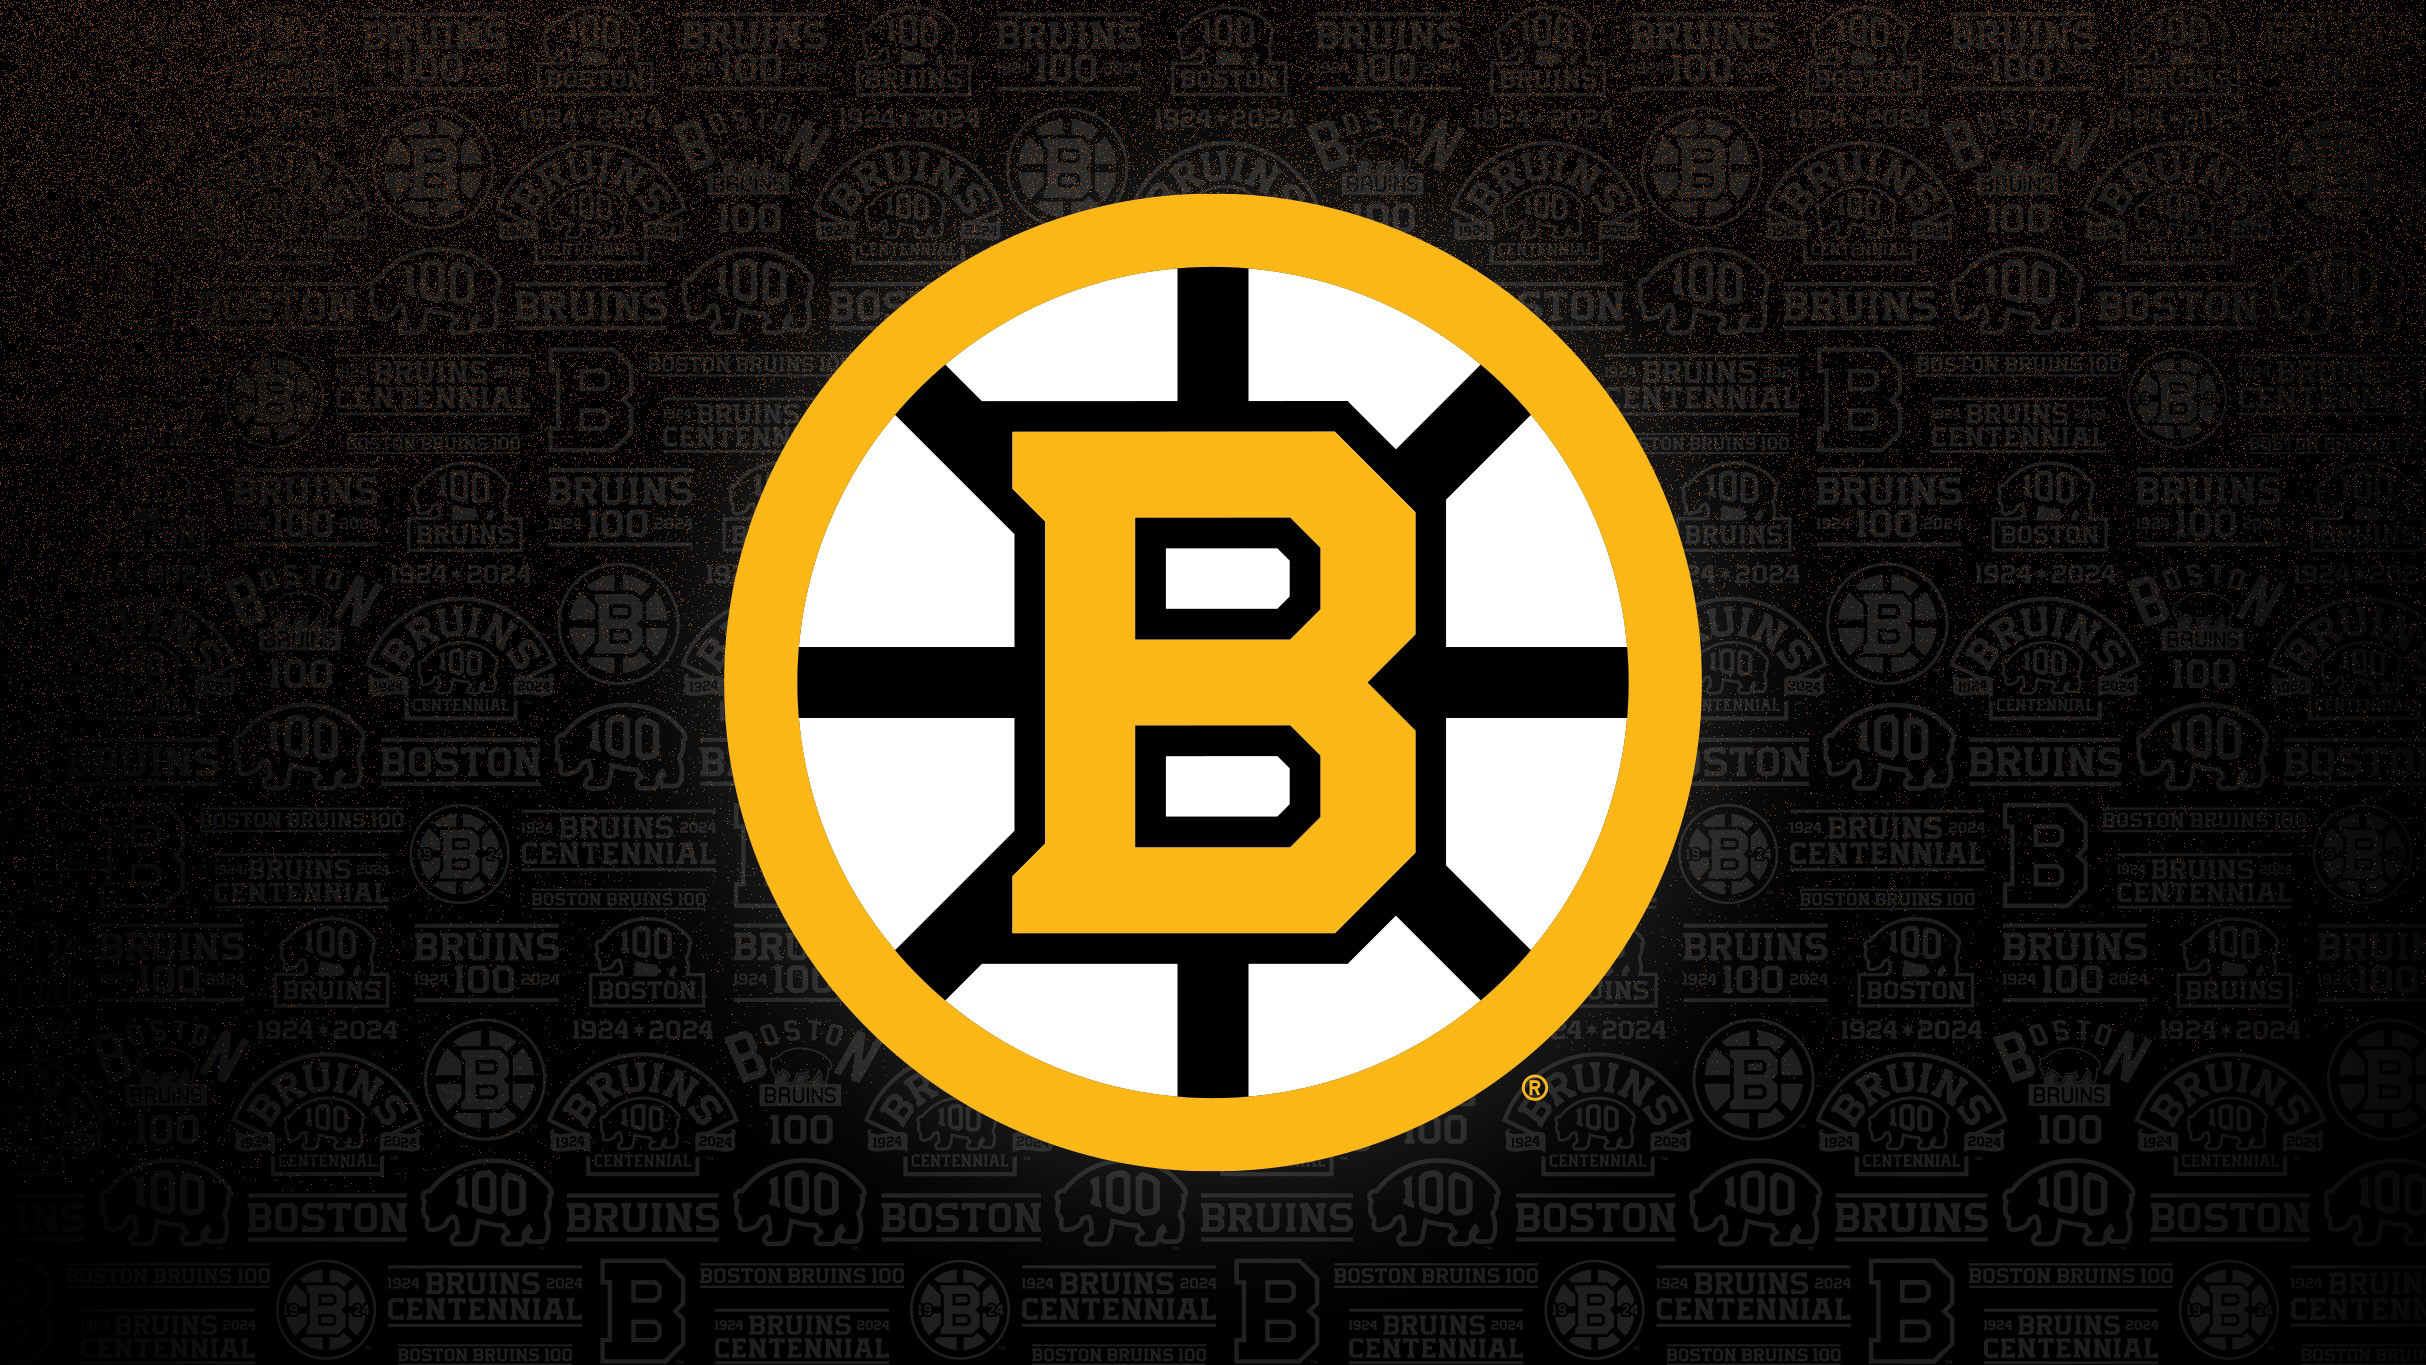 Second Round: Panthers at Bruins Rd 2 Hm Gm 1